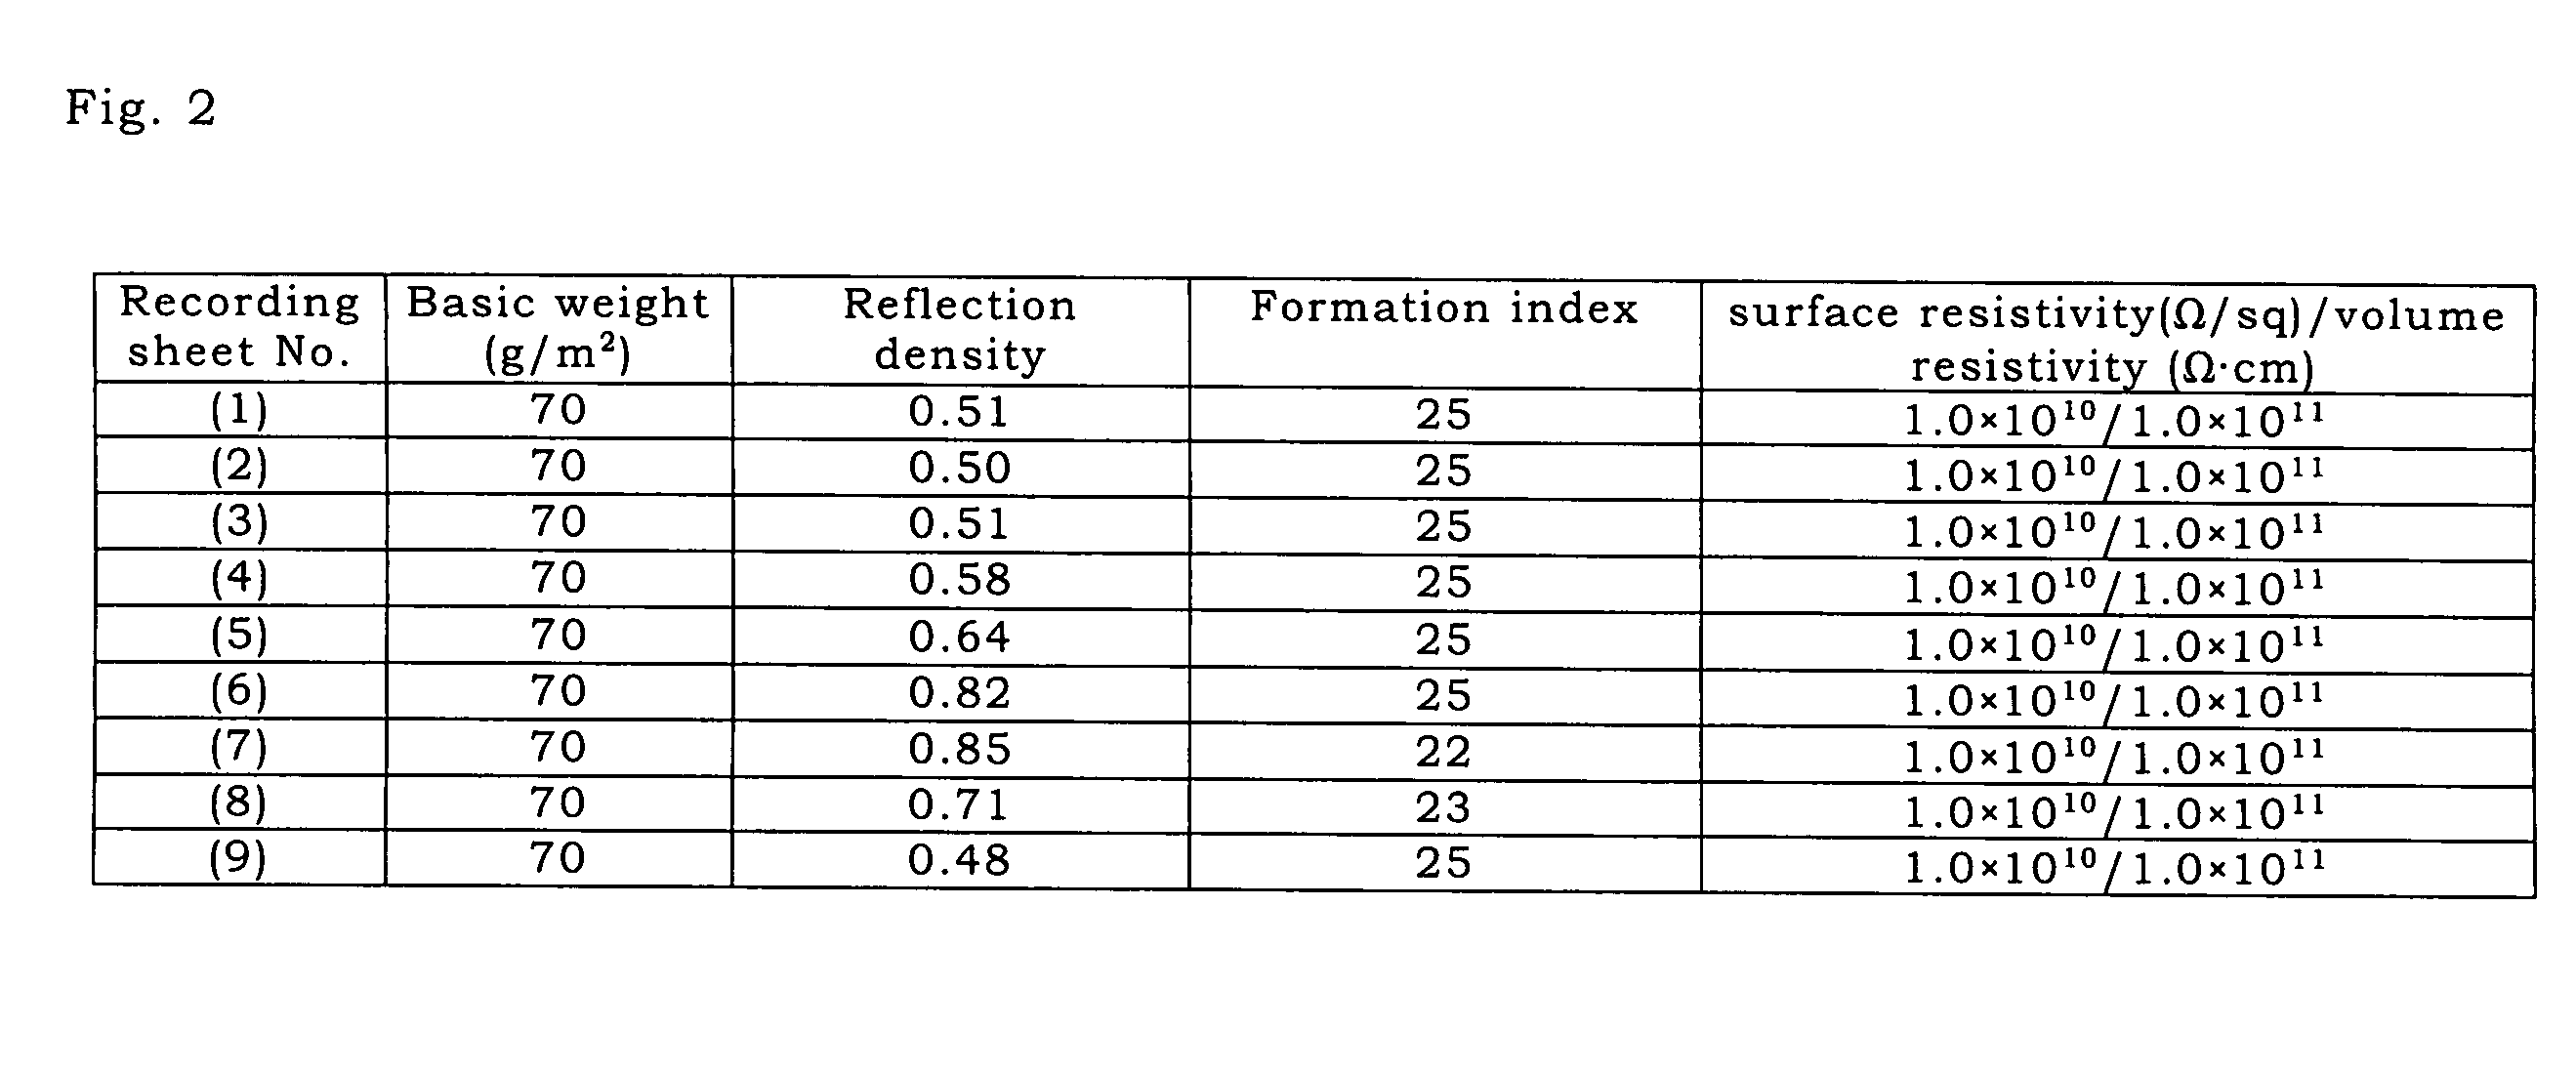 Recording sheets and image forming method using the recording sheets